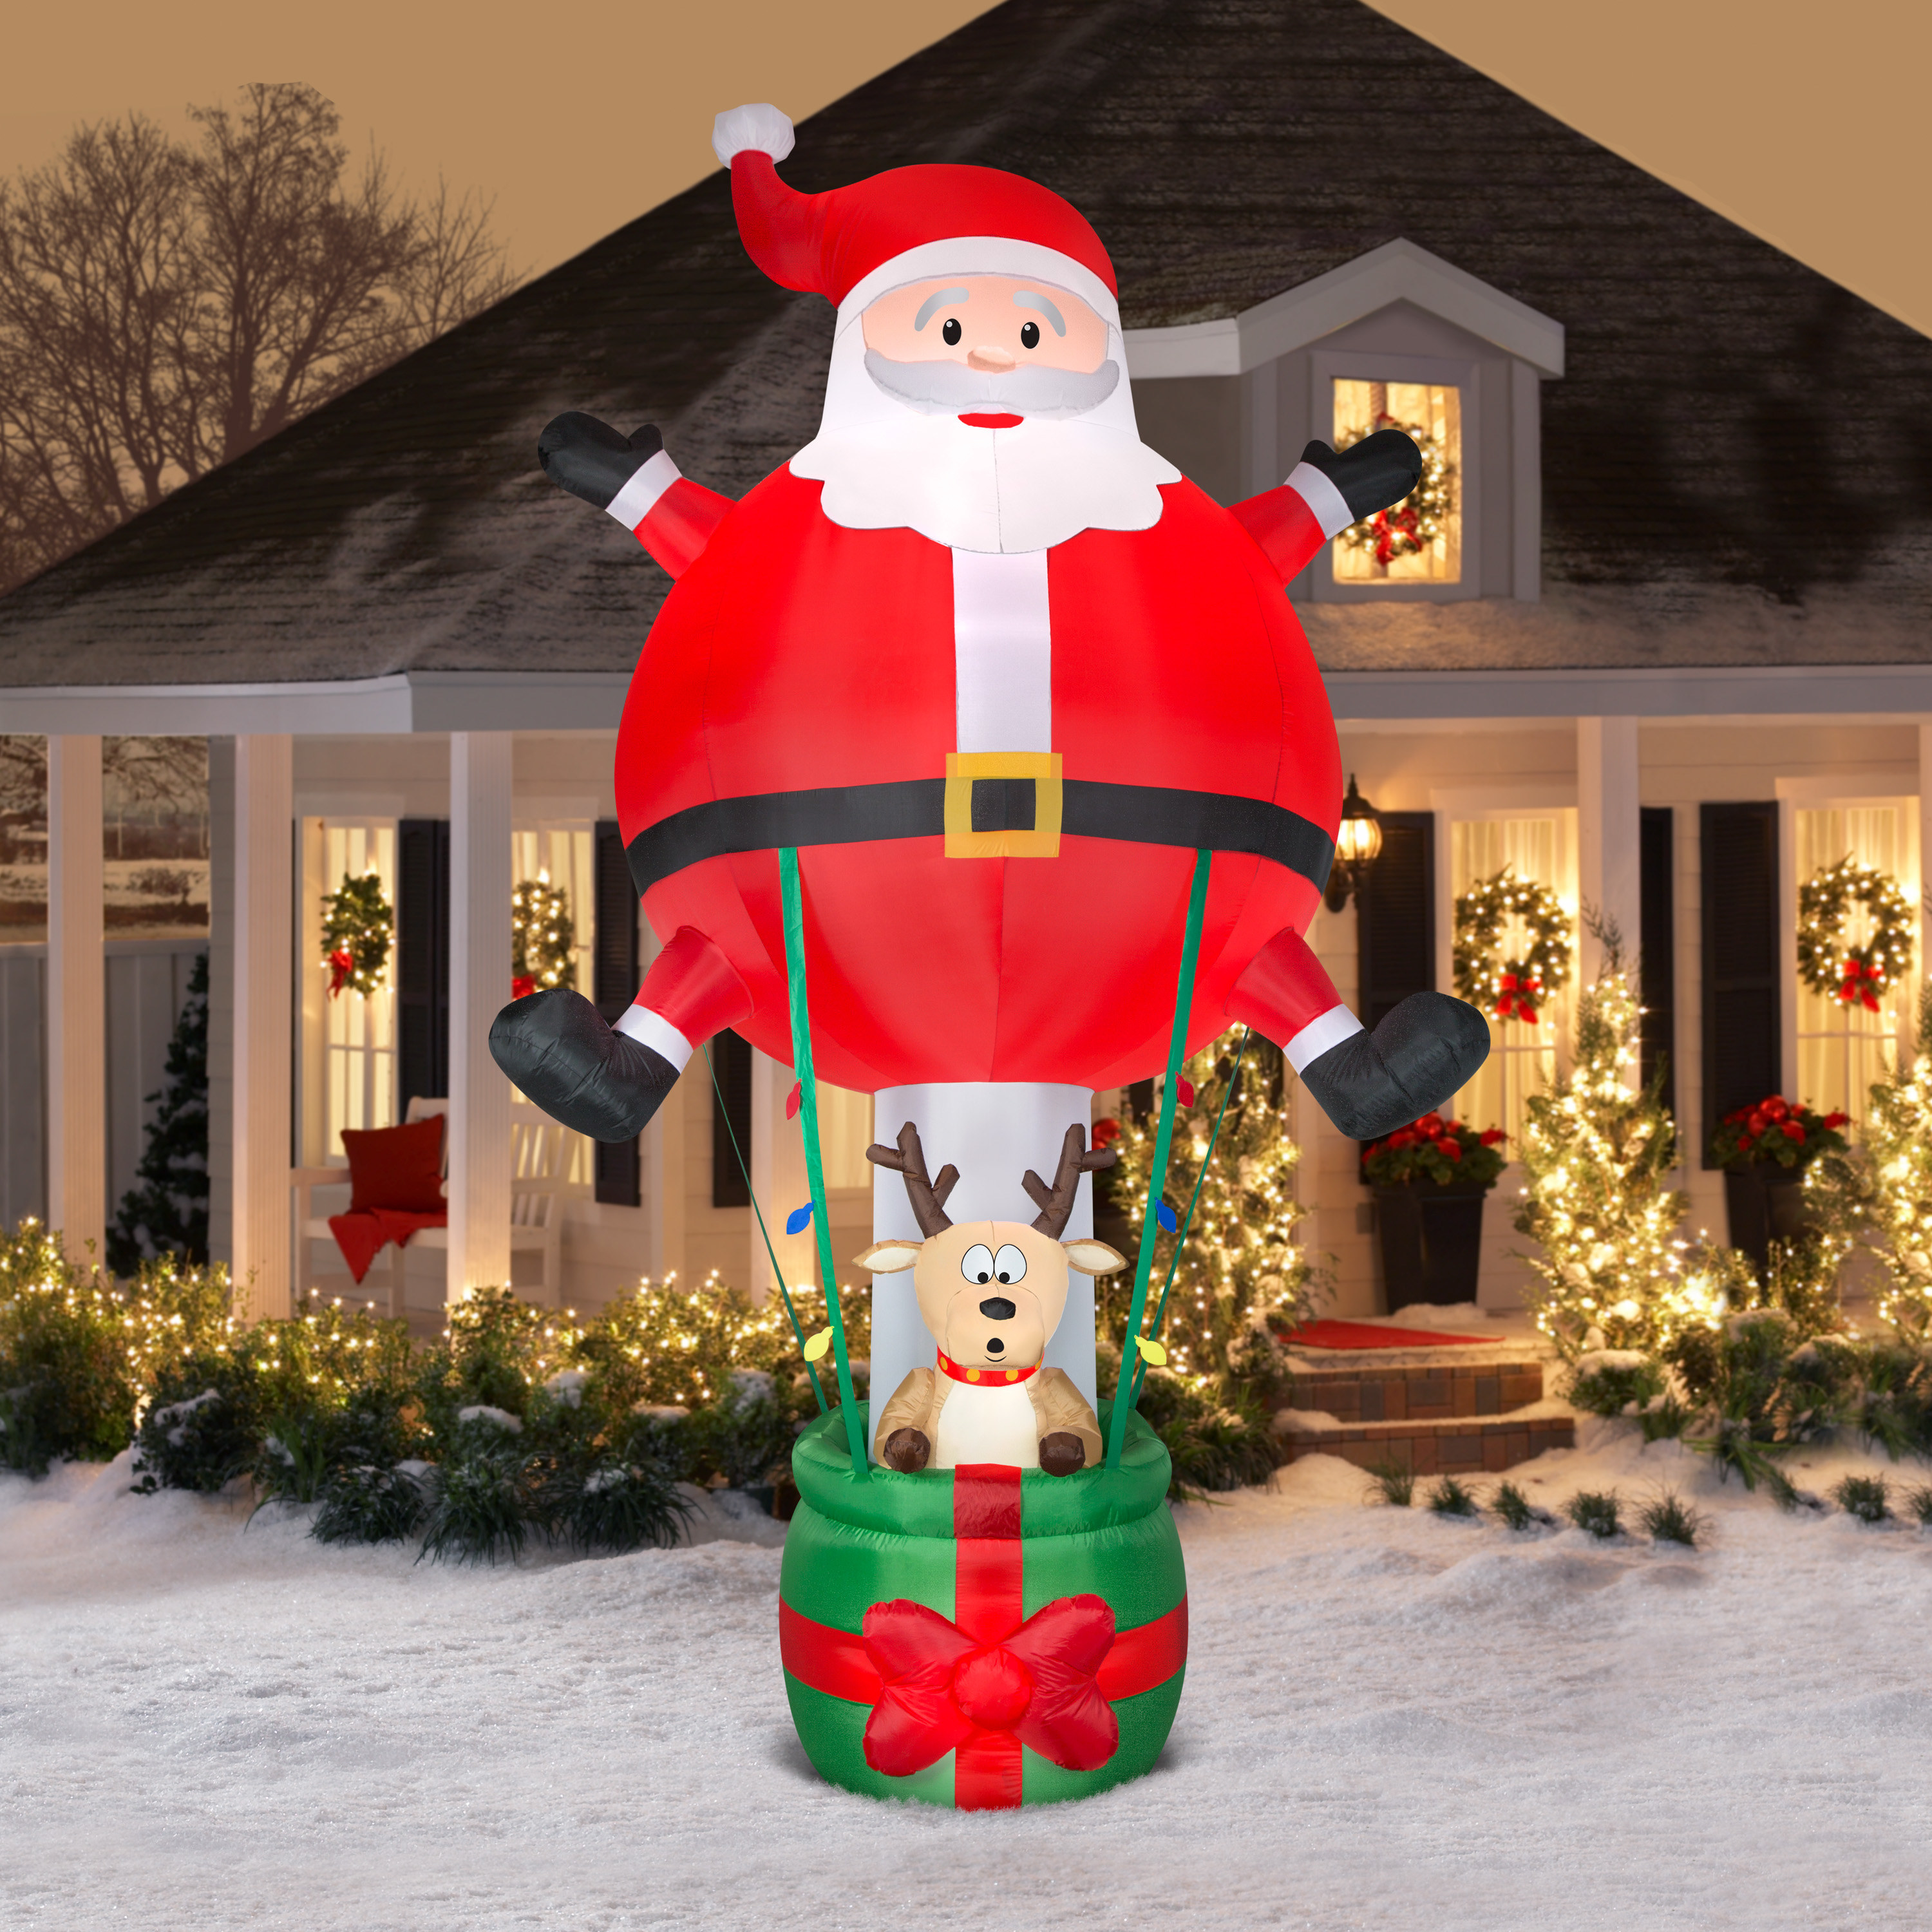 The Santa inflatable placed in front of a house to show its size